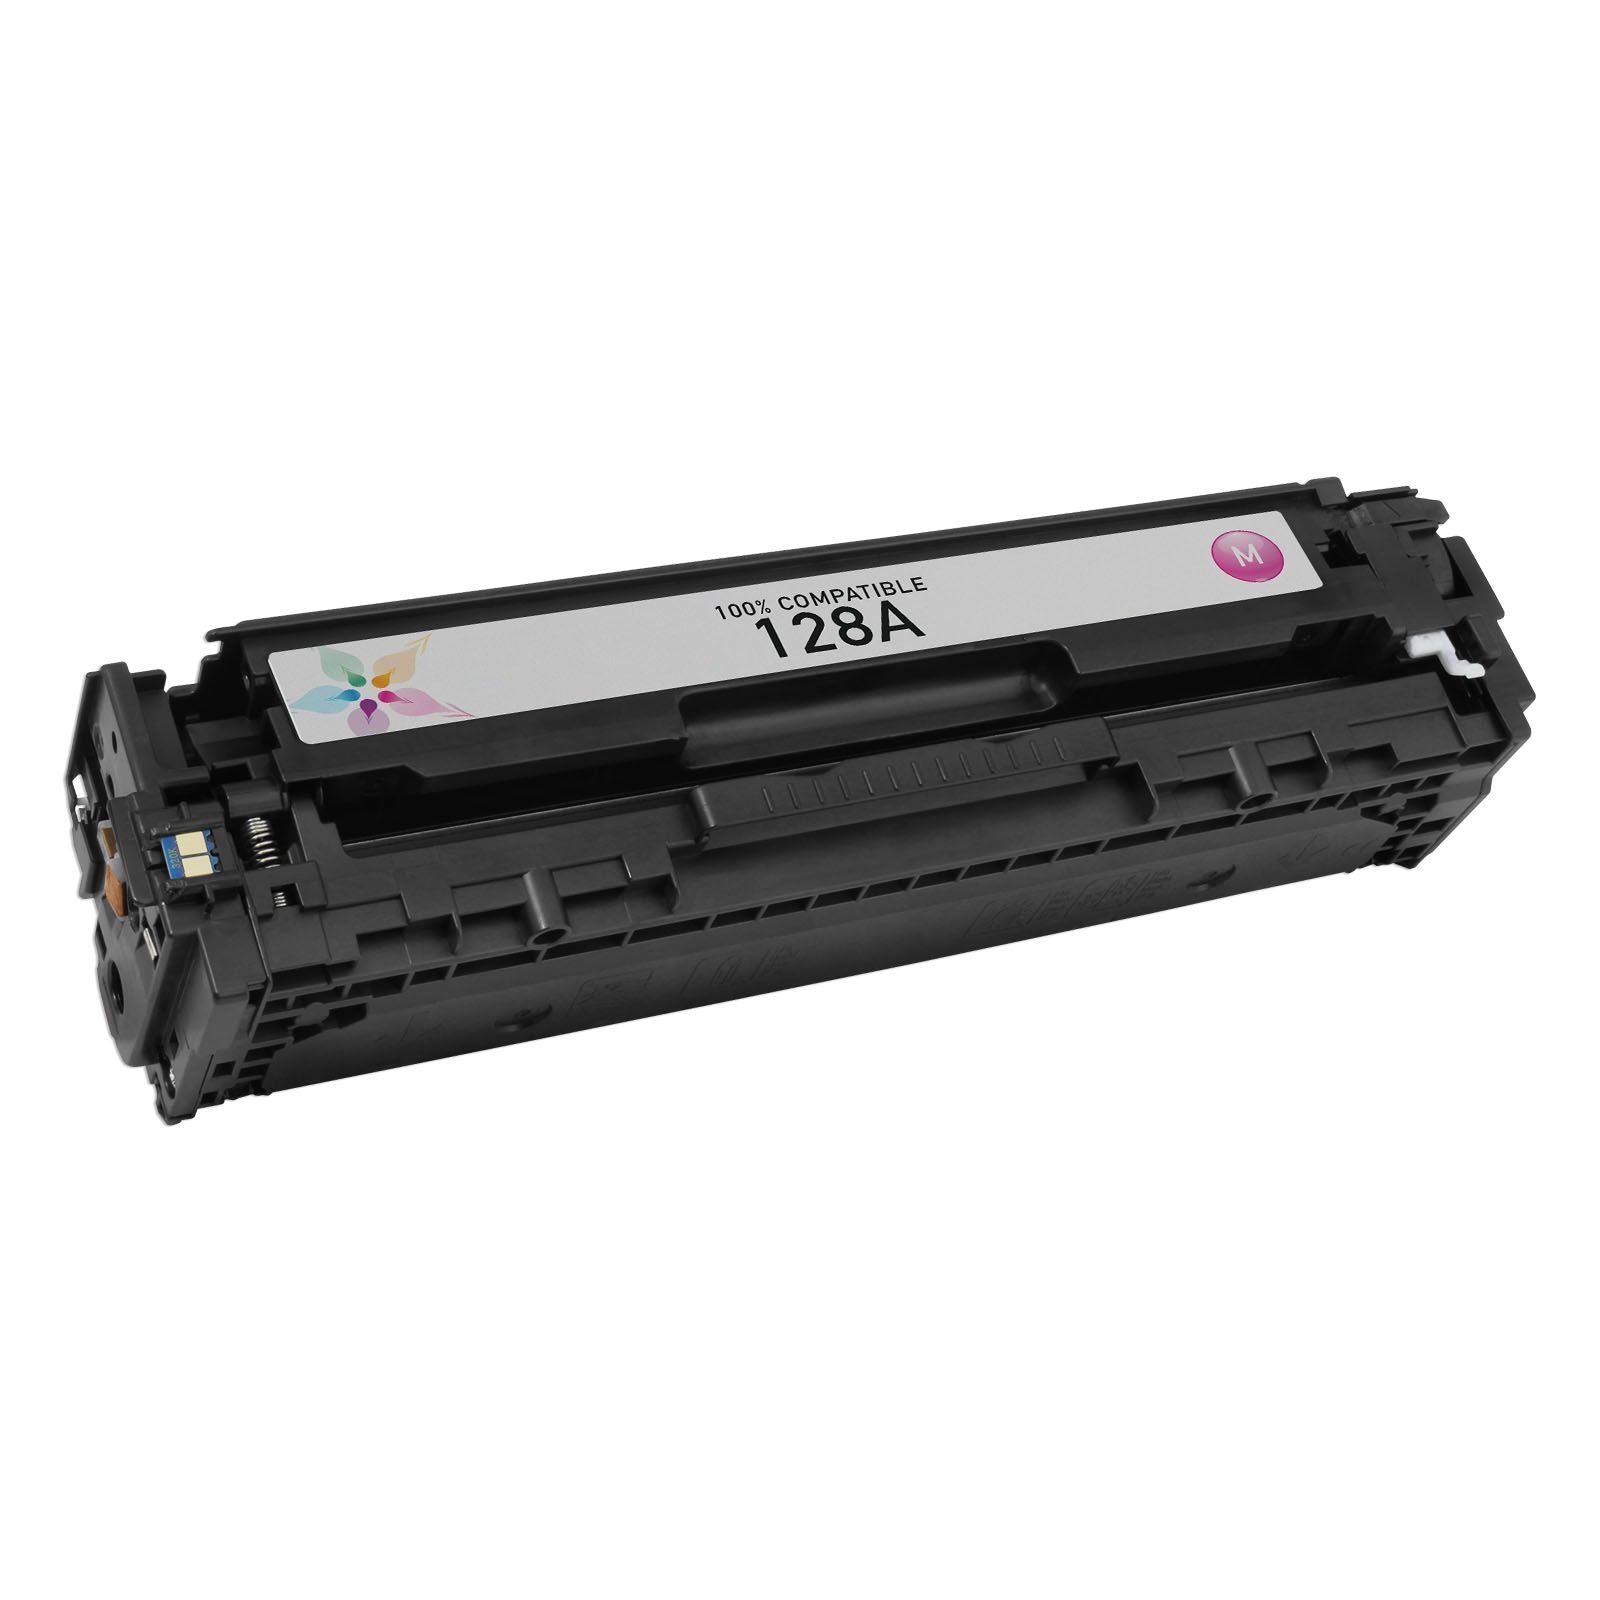 IMPERIAL BRAND Compatible toner cartridge for HP MAGENTA 128A 1300 PAGE LASER TONER